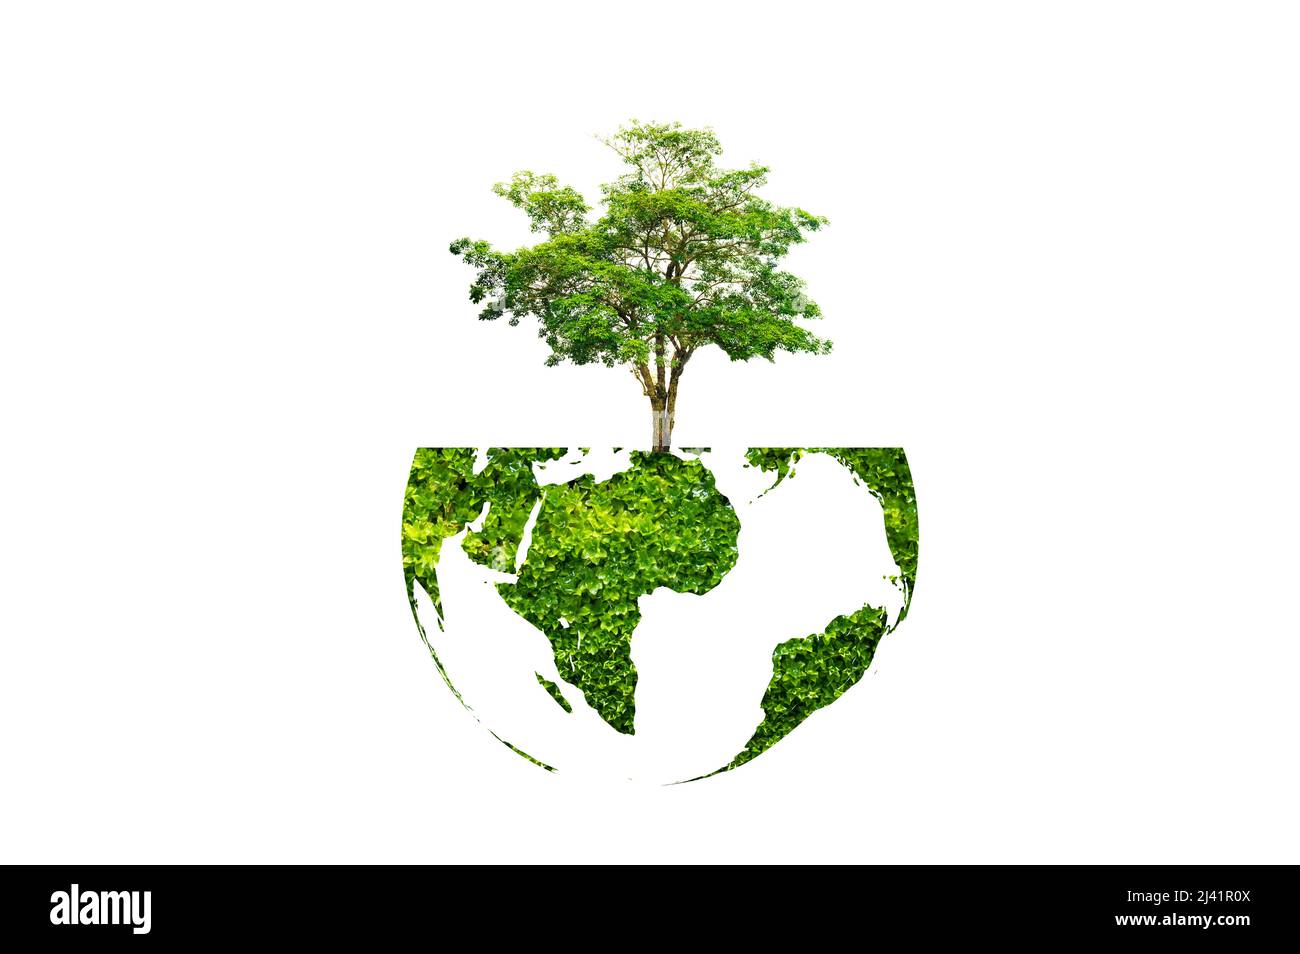 earth day tree on green earth on white isolate background Stock Photo